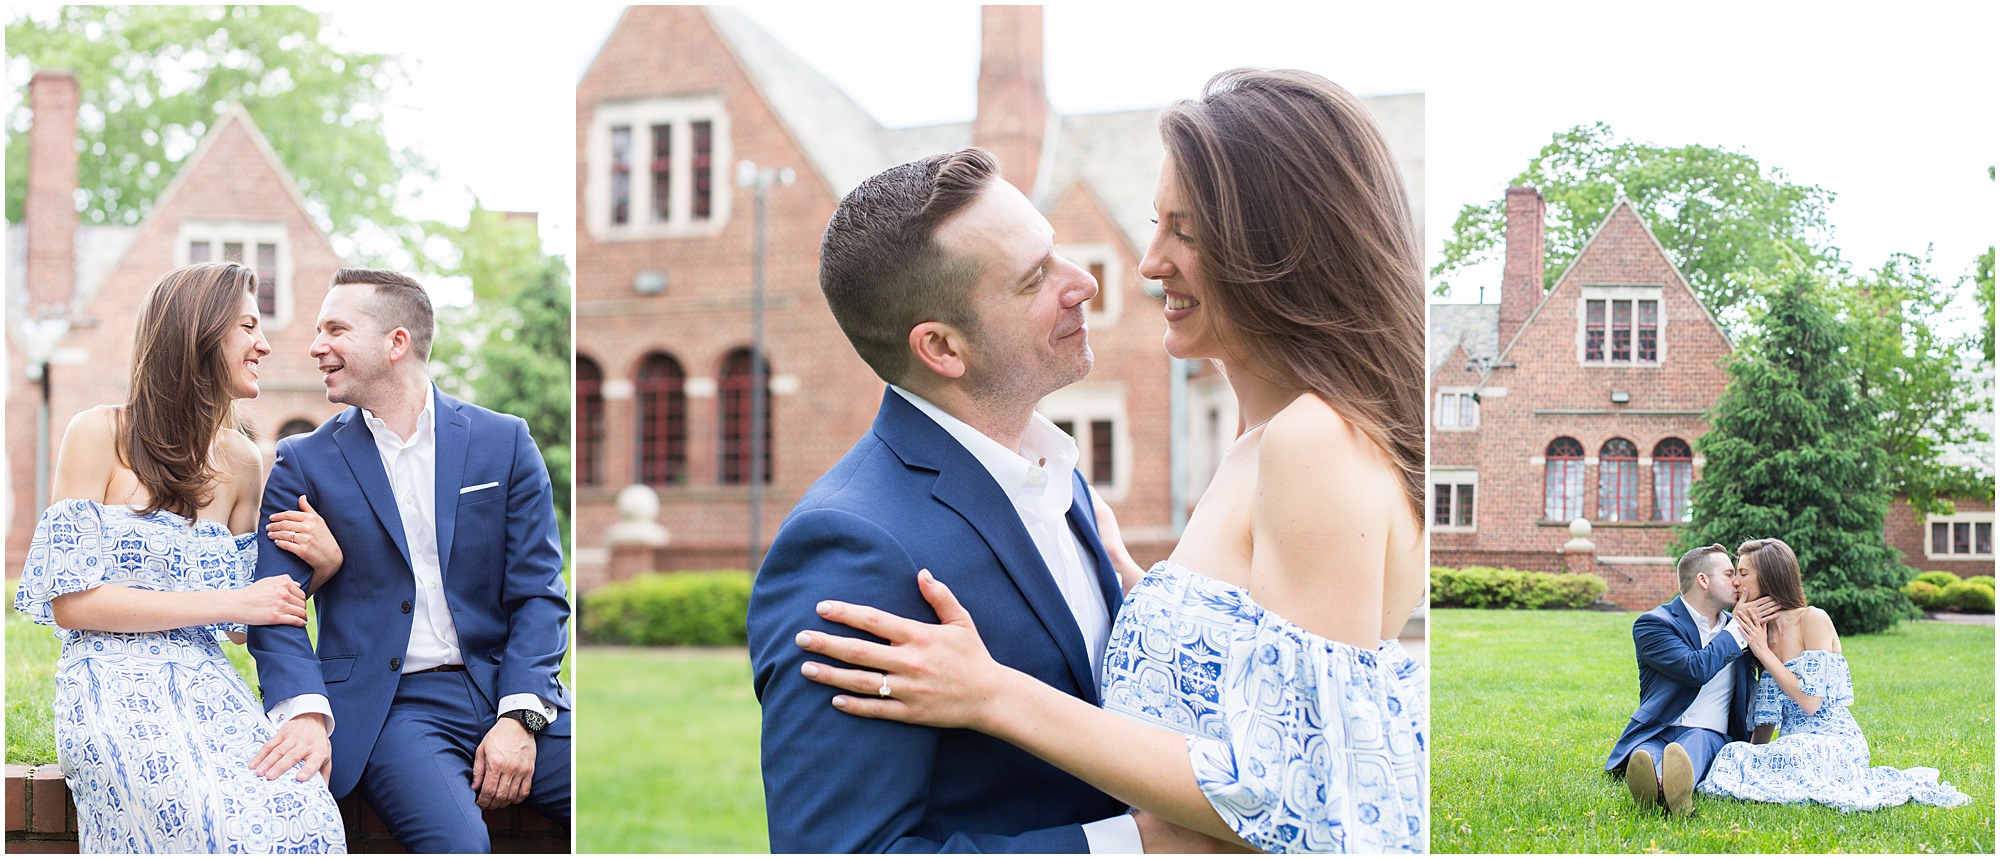 New Jersey Engagement Photo Locations: Moorestown Community House